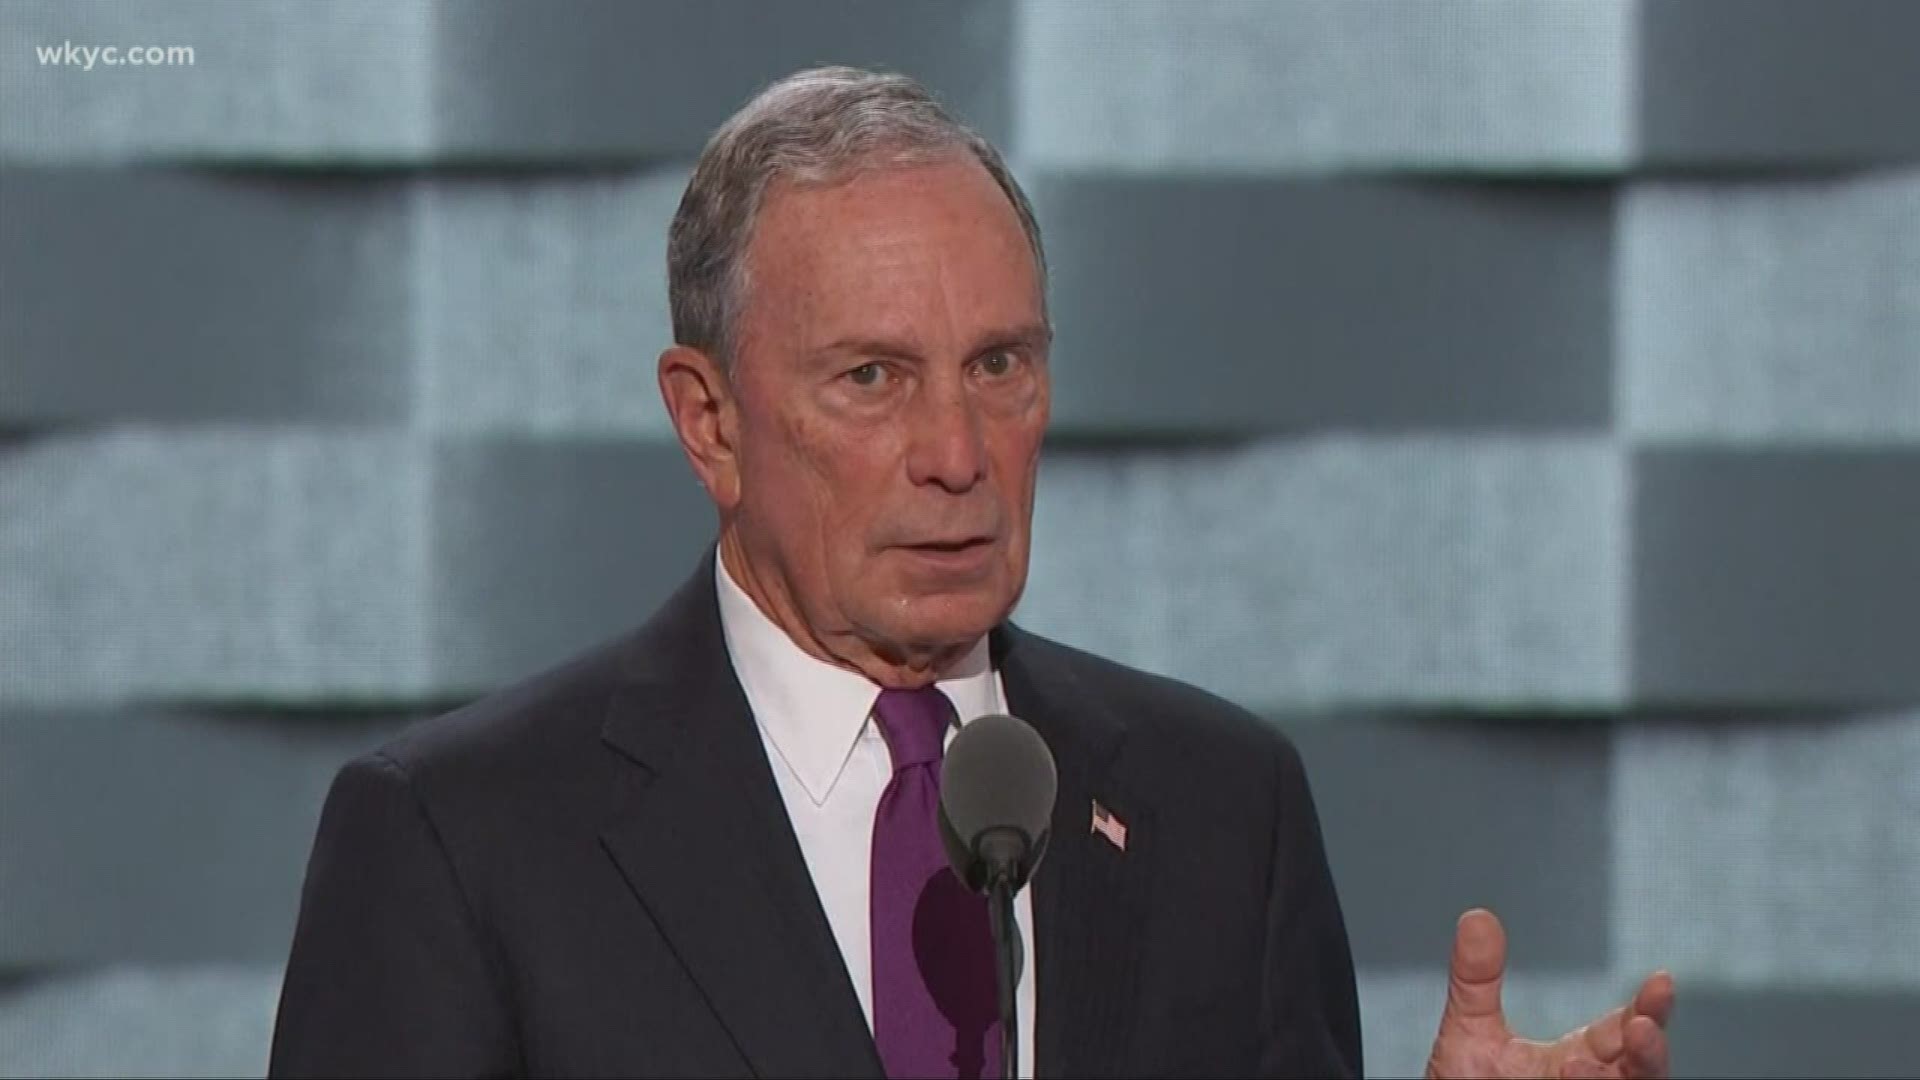 According to advisers, Bloomberg has not made a final decision on whether to run. He is taking steps toward a campaign.